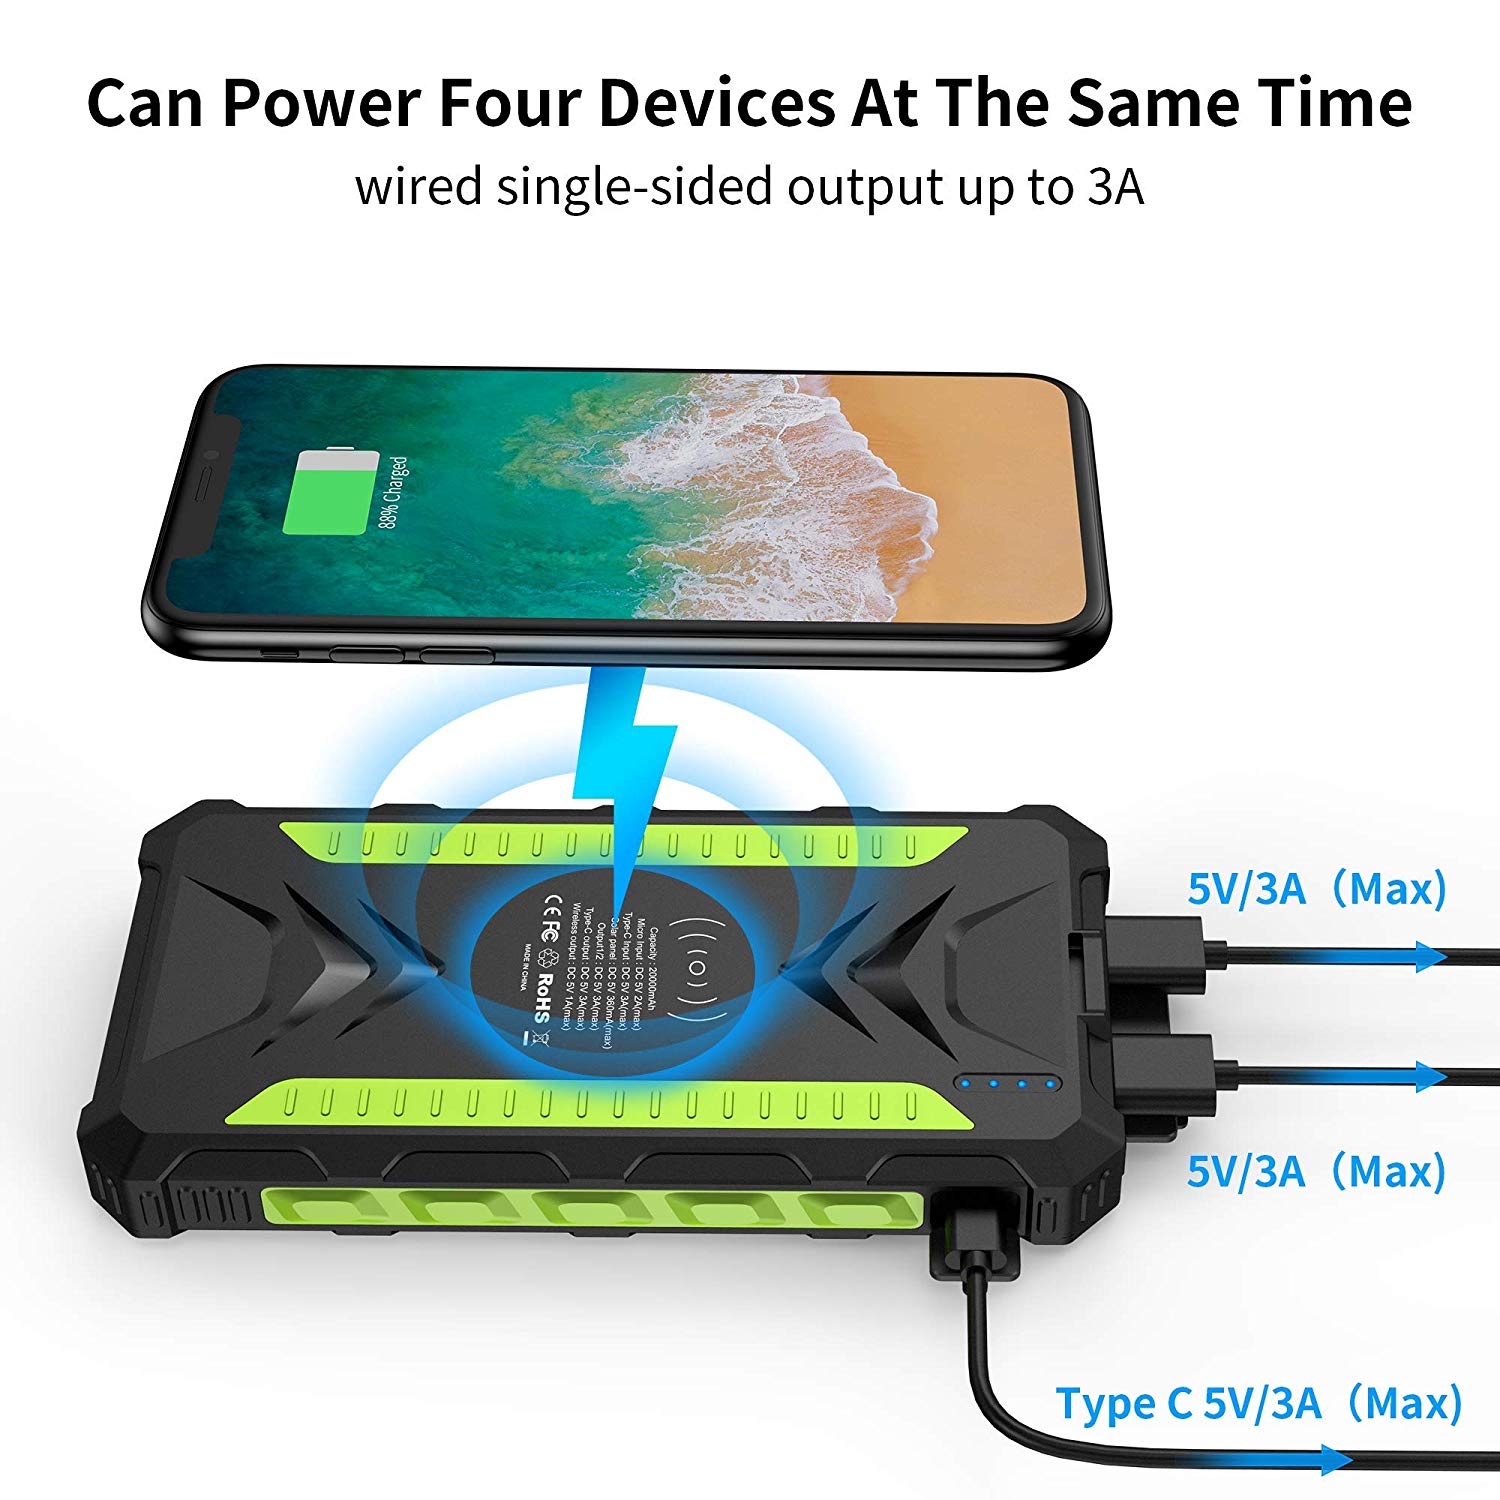 Solar Power Bank 36000mAh,Qi Wireless Charger Built in 3 Cables IPX5 Waterproof,Portable Solar External Battery Pack with 3 Input 4 Output 15W USB C Port Camping Flashlight,for iPhone Samsung Tablet 